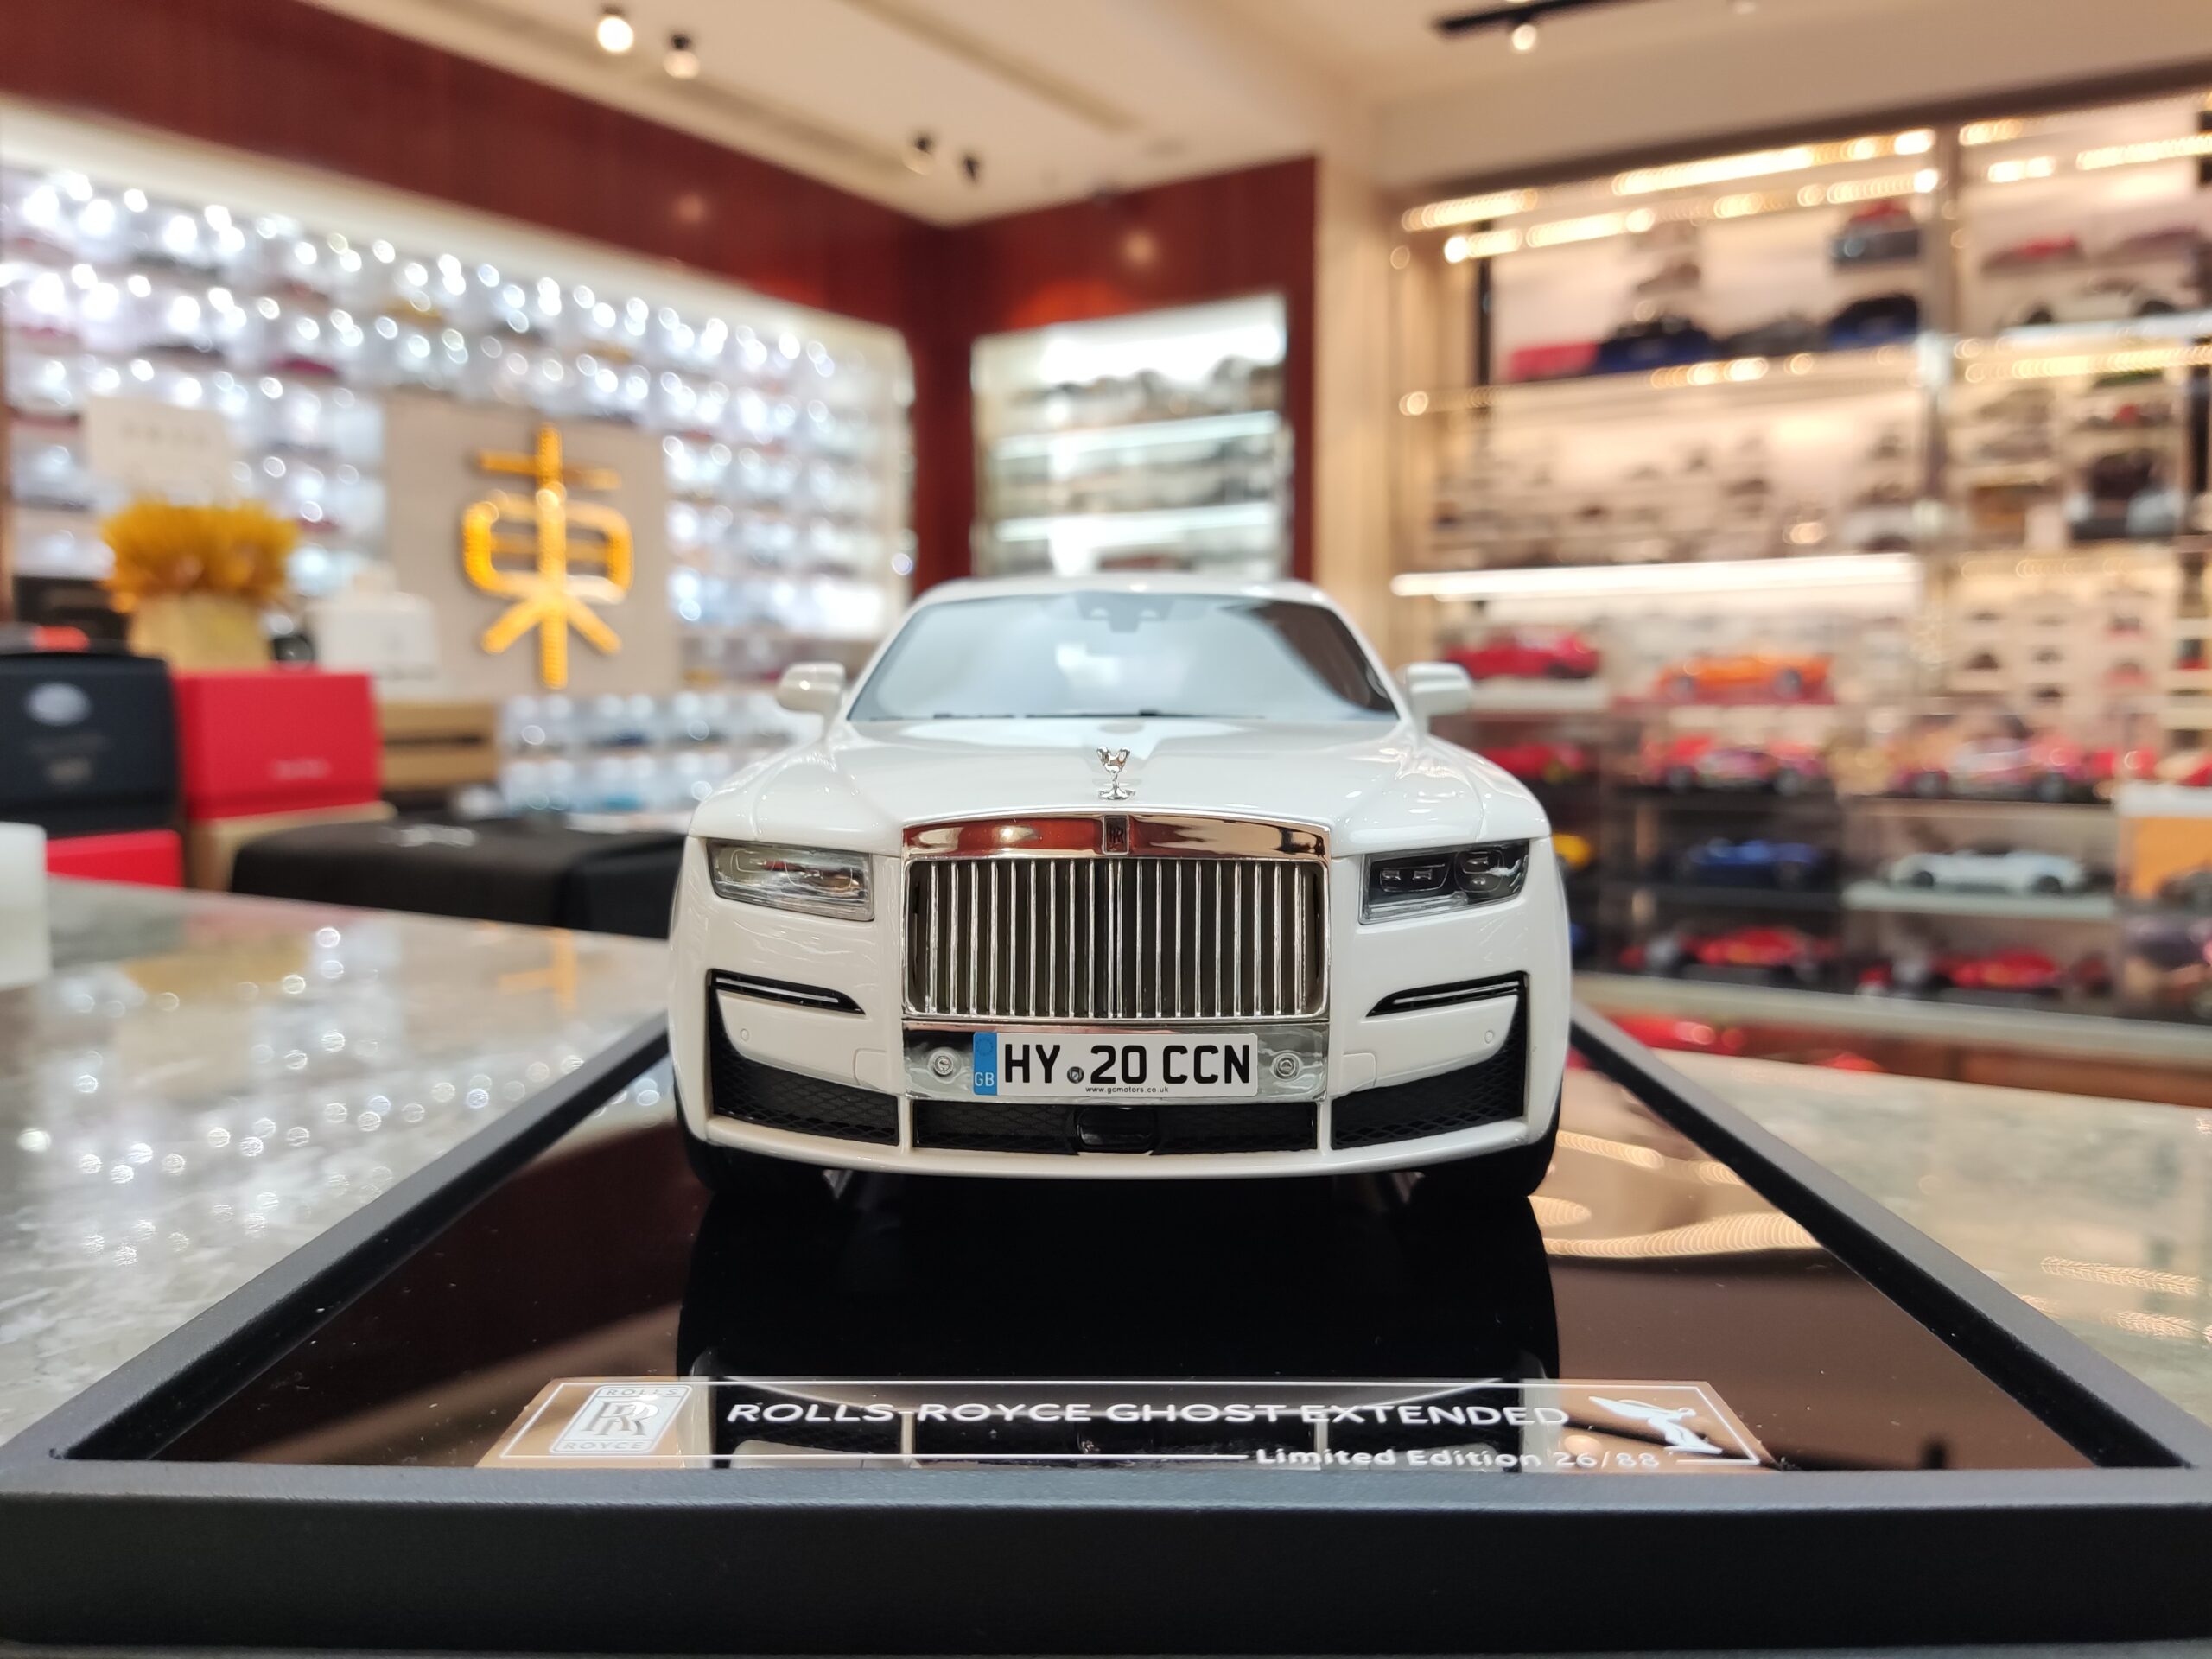 Biggest and Best Worlds Largest RollsRoyce Dealer Opens in Abu Dhabi